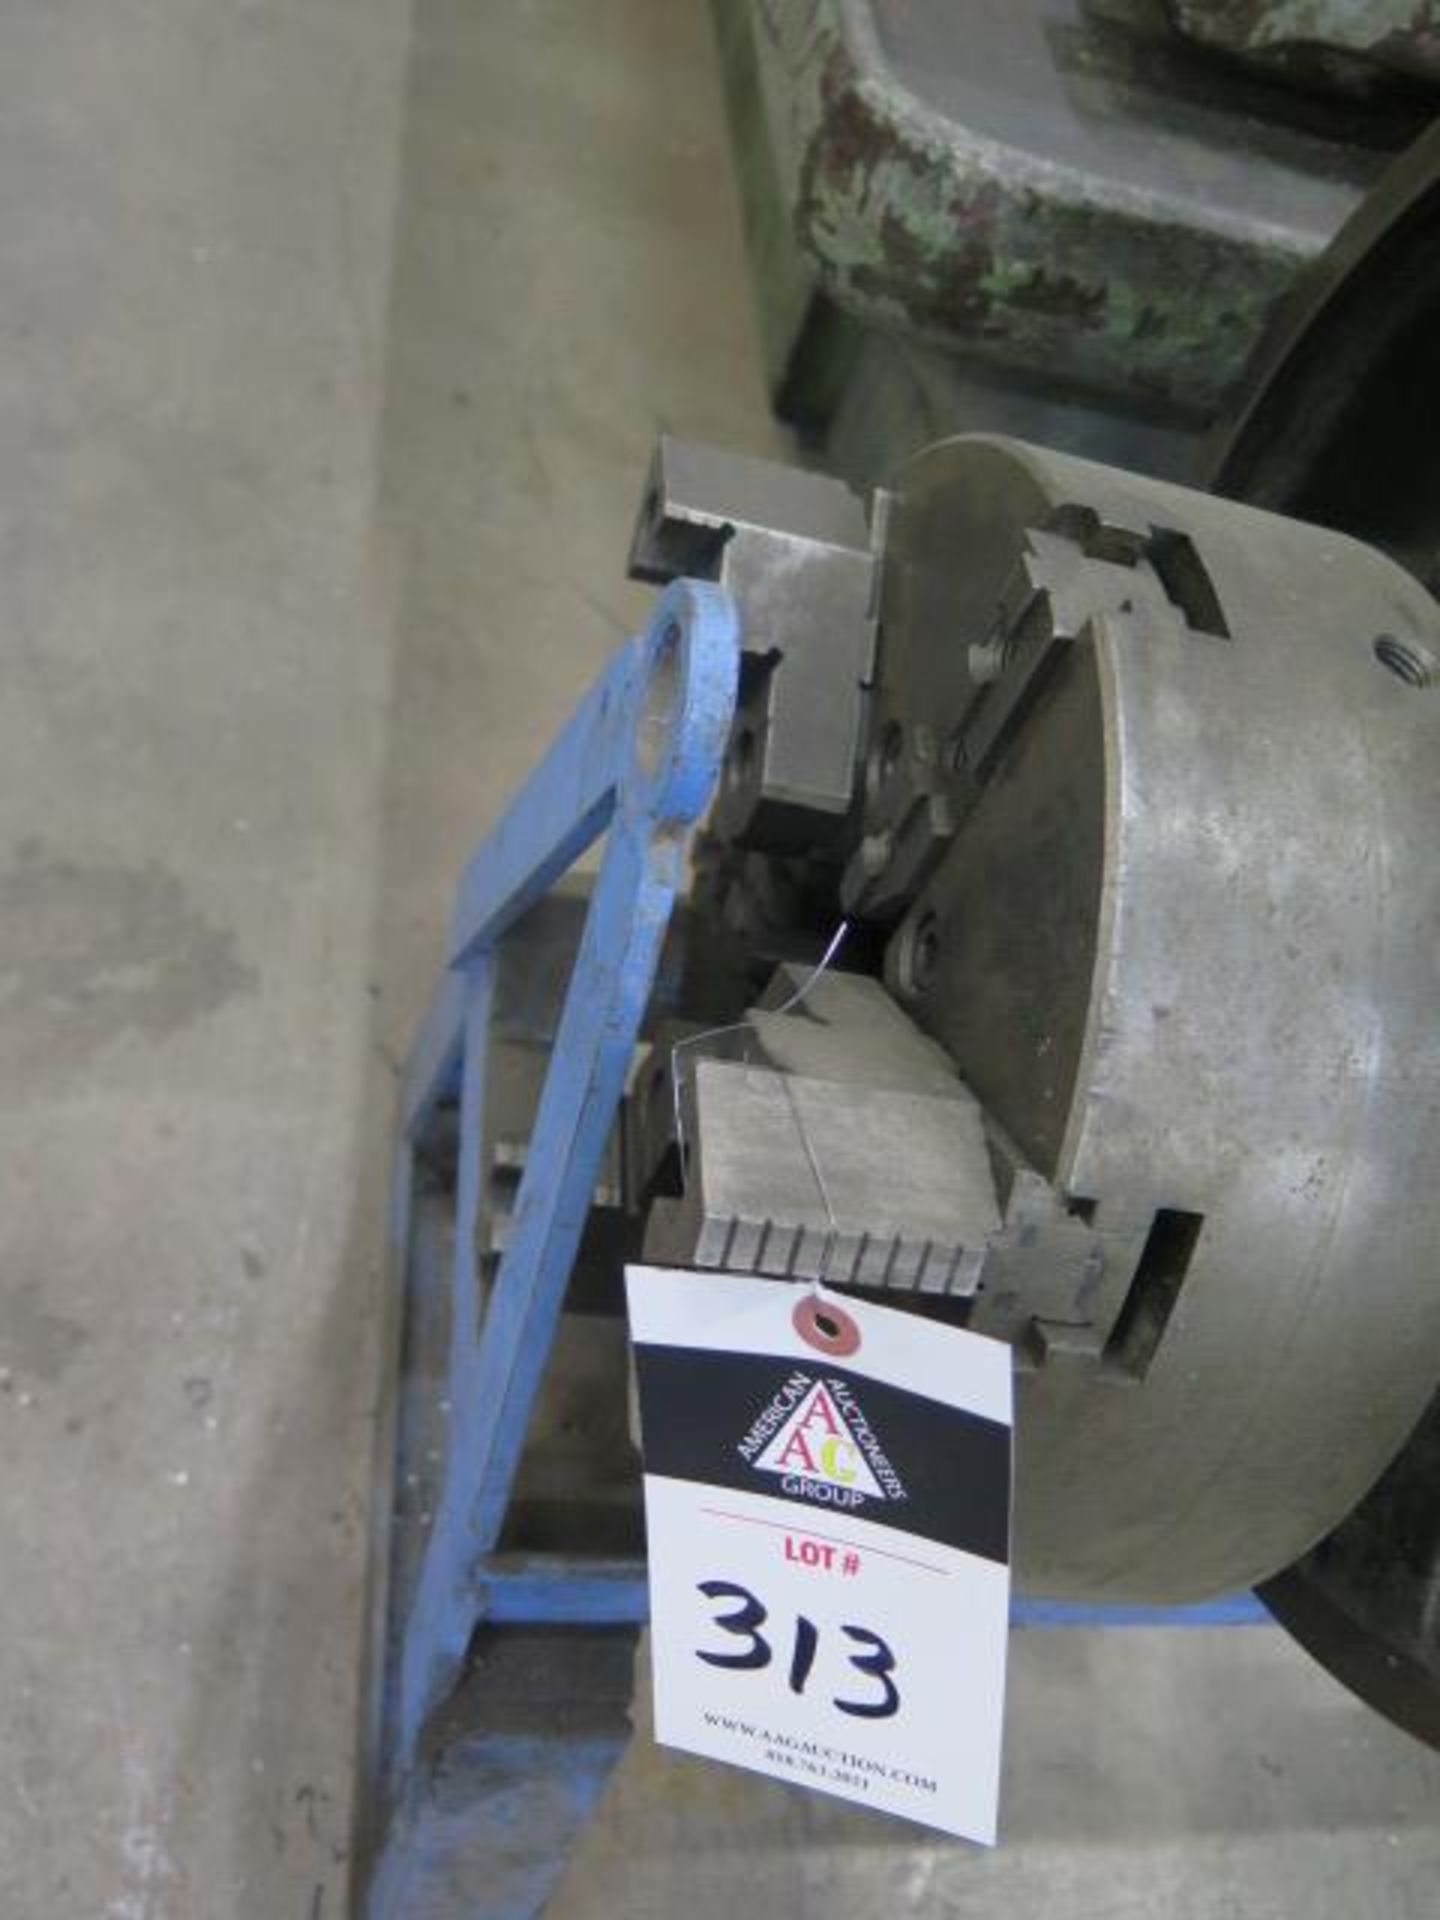 12" 6-Jaw Chuck (SOLD AS-IS - NO WARRANTY)